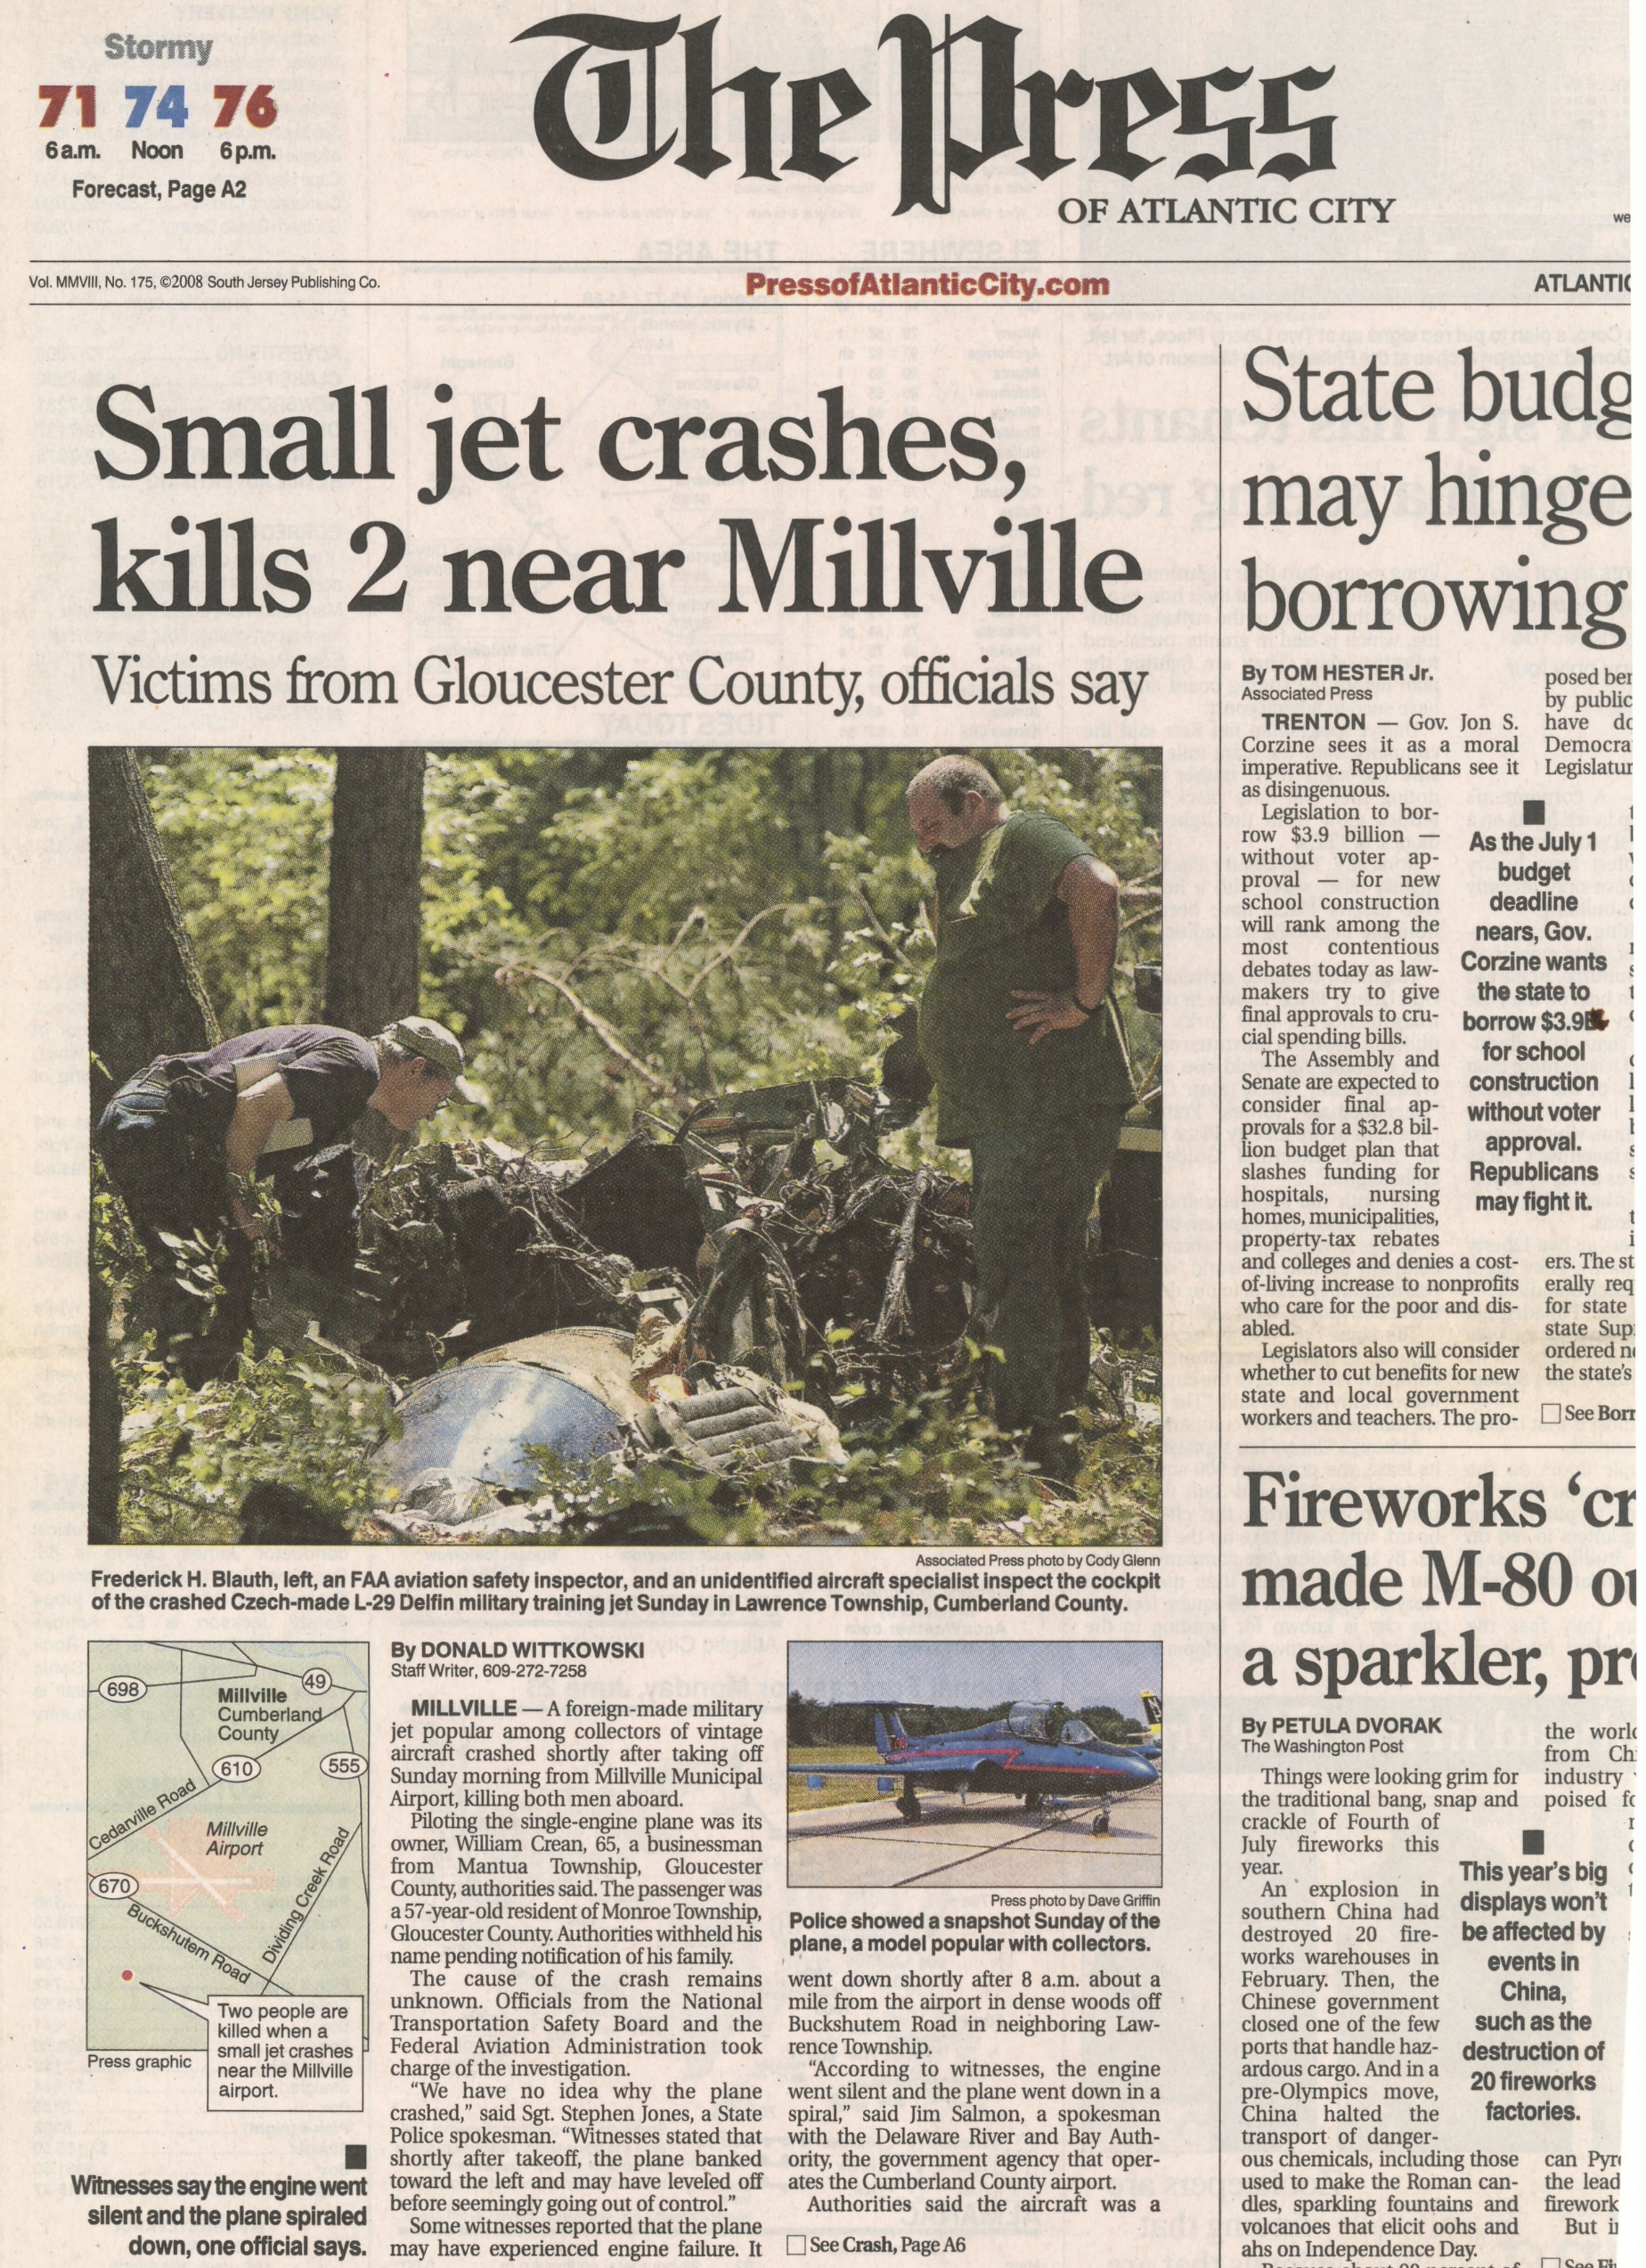  Officials examine the wreckage after a fatal plane crash in Millville, NJ June 22 2008 /  The Press of Atlantic City  